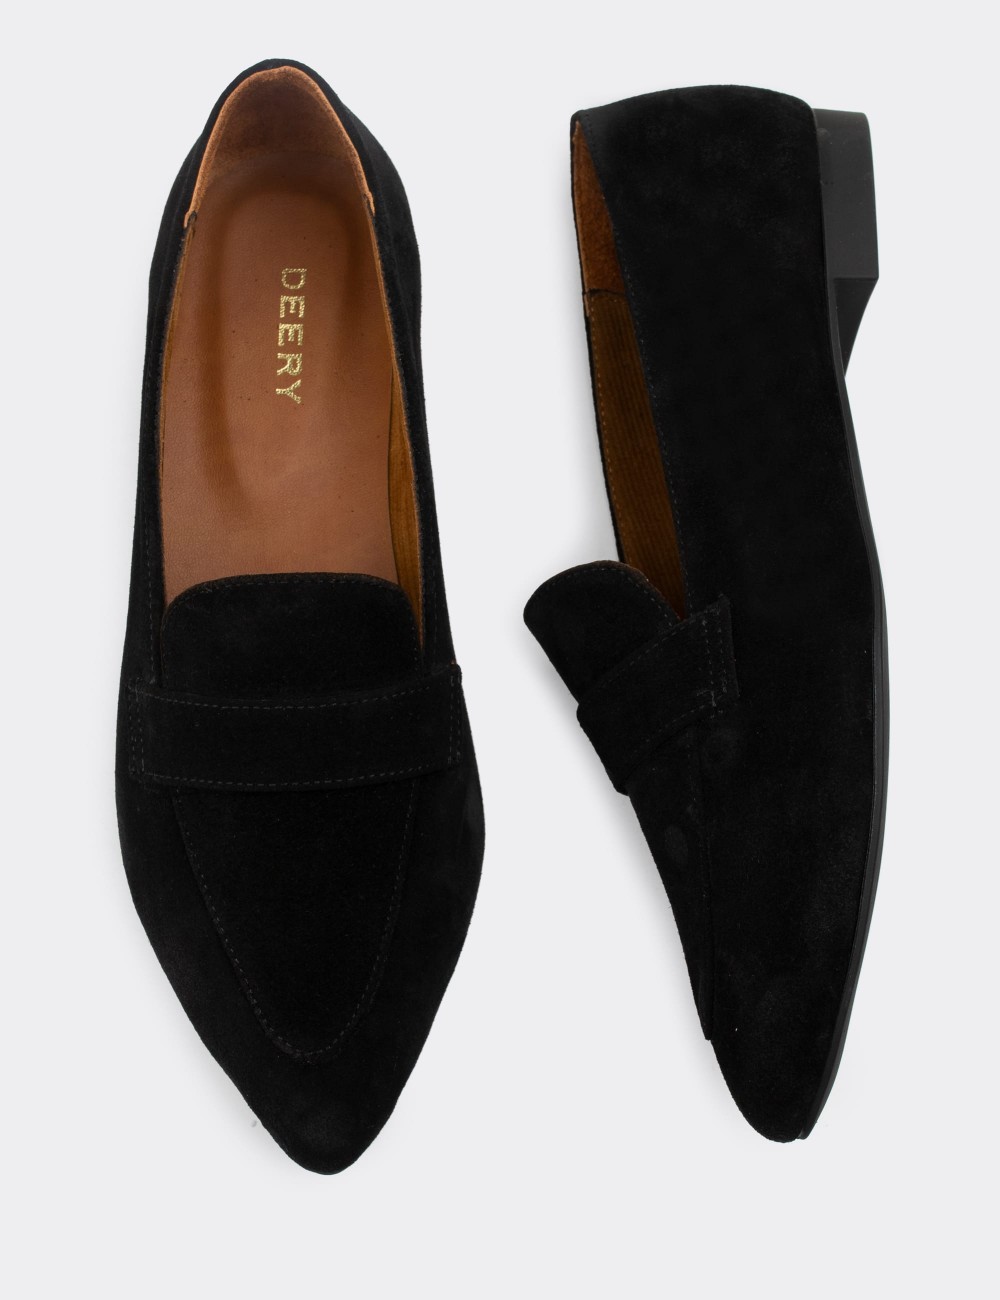 Black Suede Leather Loafers - 01897ZSYHC01